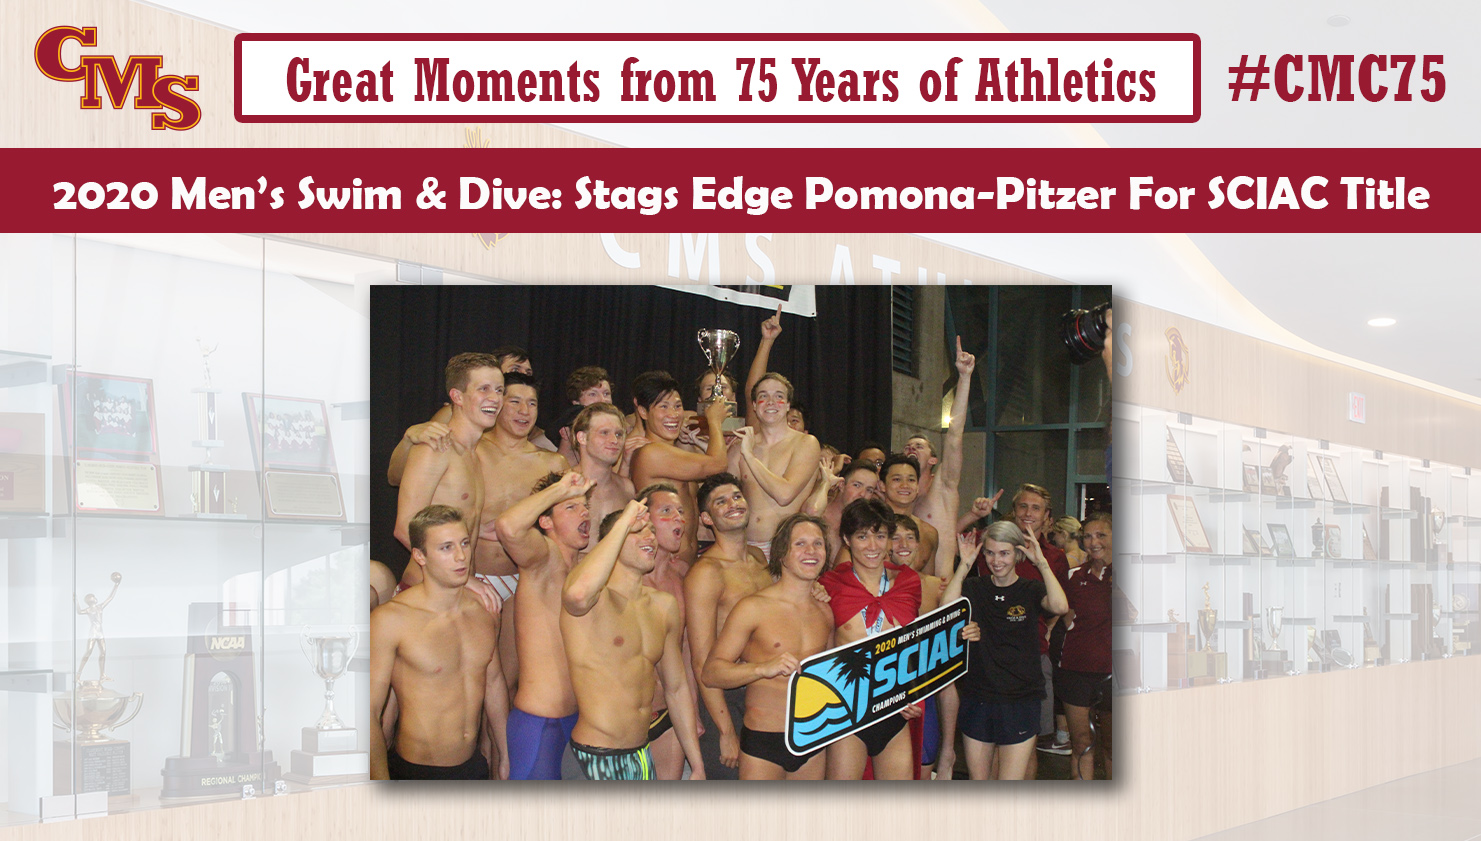 CMS celebrating with the SCIAC trophy. Words over the photo read: Great Moments from 75 Years of Athletics, 2020 Men's Swim & Dive: Stags Edge Pomona-Pitzer for SCIAC title